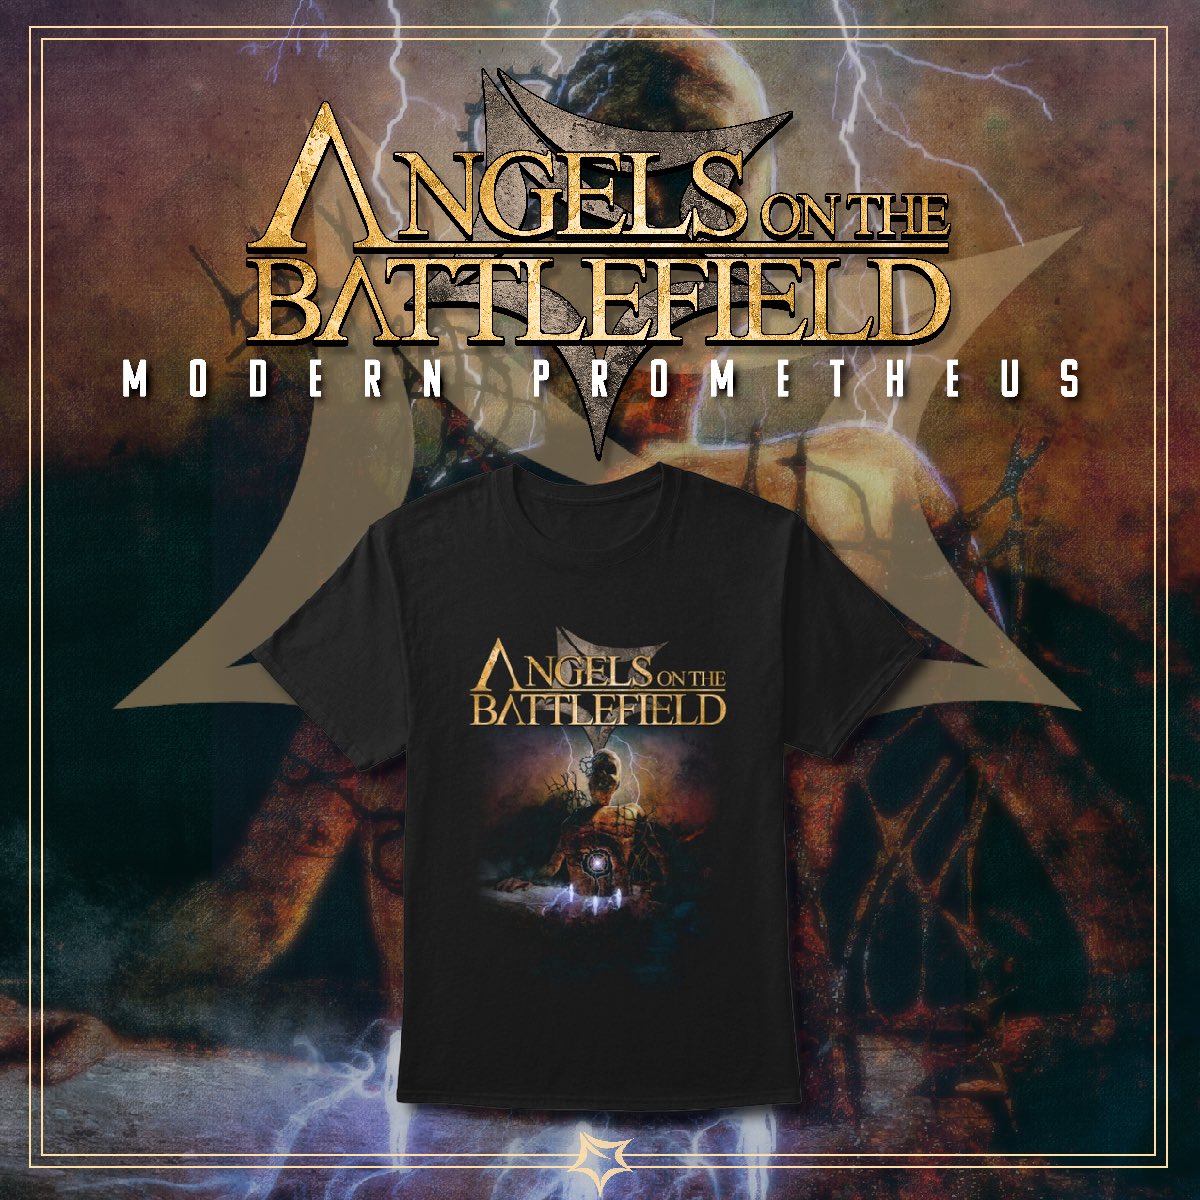 Conquer your battlefield with the new “Modern Prometheus” T-Shirt! Available on our webstore.

…lsonthebattlefield.creator-spring.com/listing/modern… 

#BandMerch #bandtee #bandtshirt #metalband #metalmerch #AngelsOnTheBattlefield